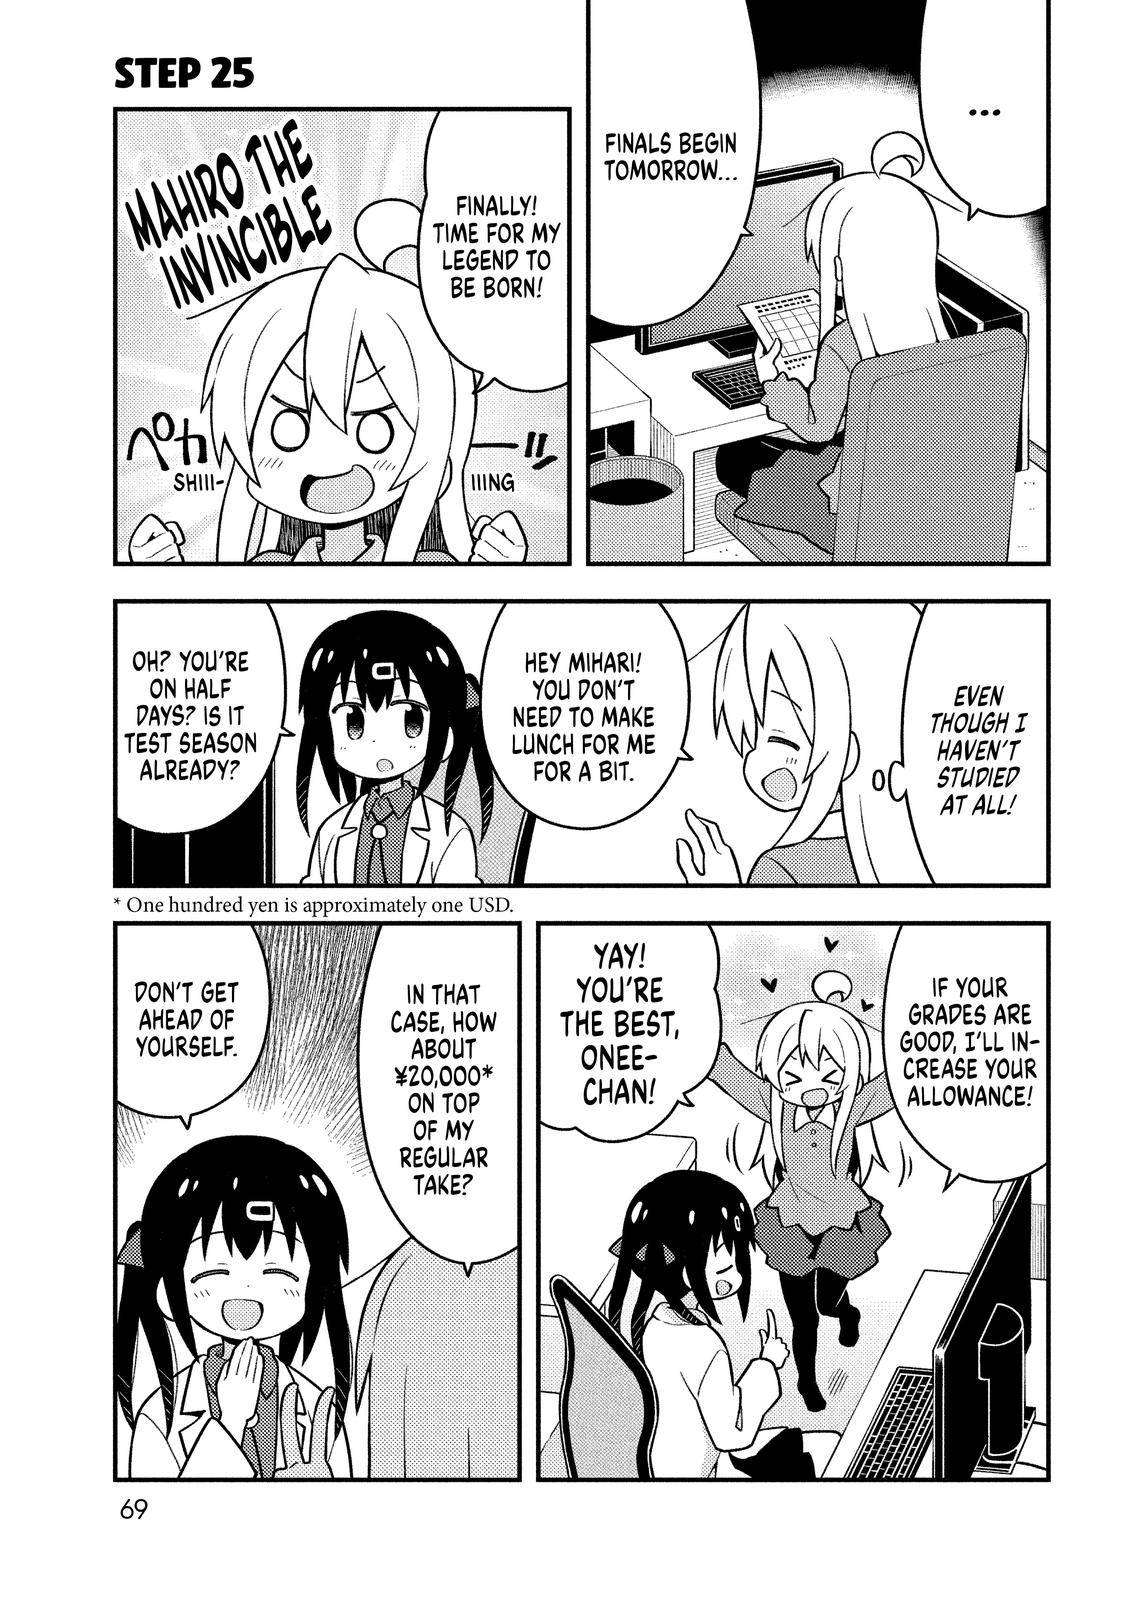 ONIMAI - I'm Now Your Sister! - chapter 25 - #1